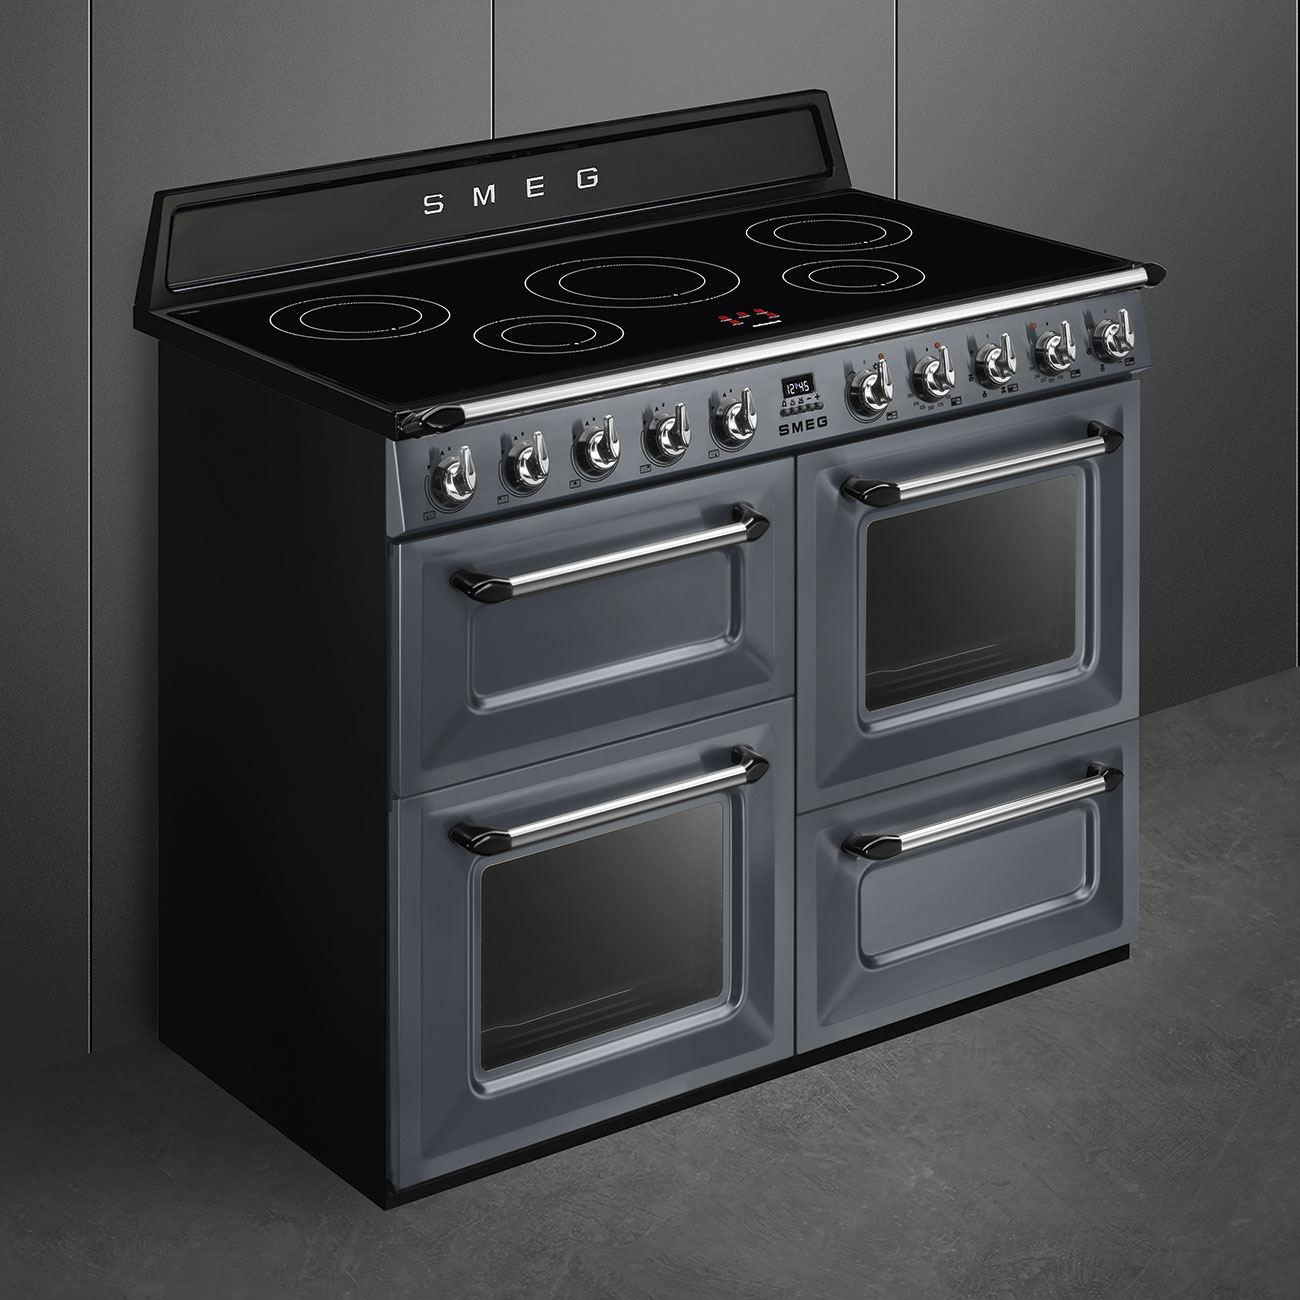 Smeg Slate Grey Cooker with Induction Hob_2